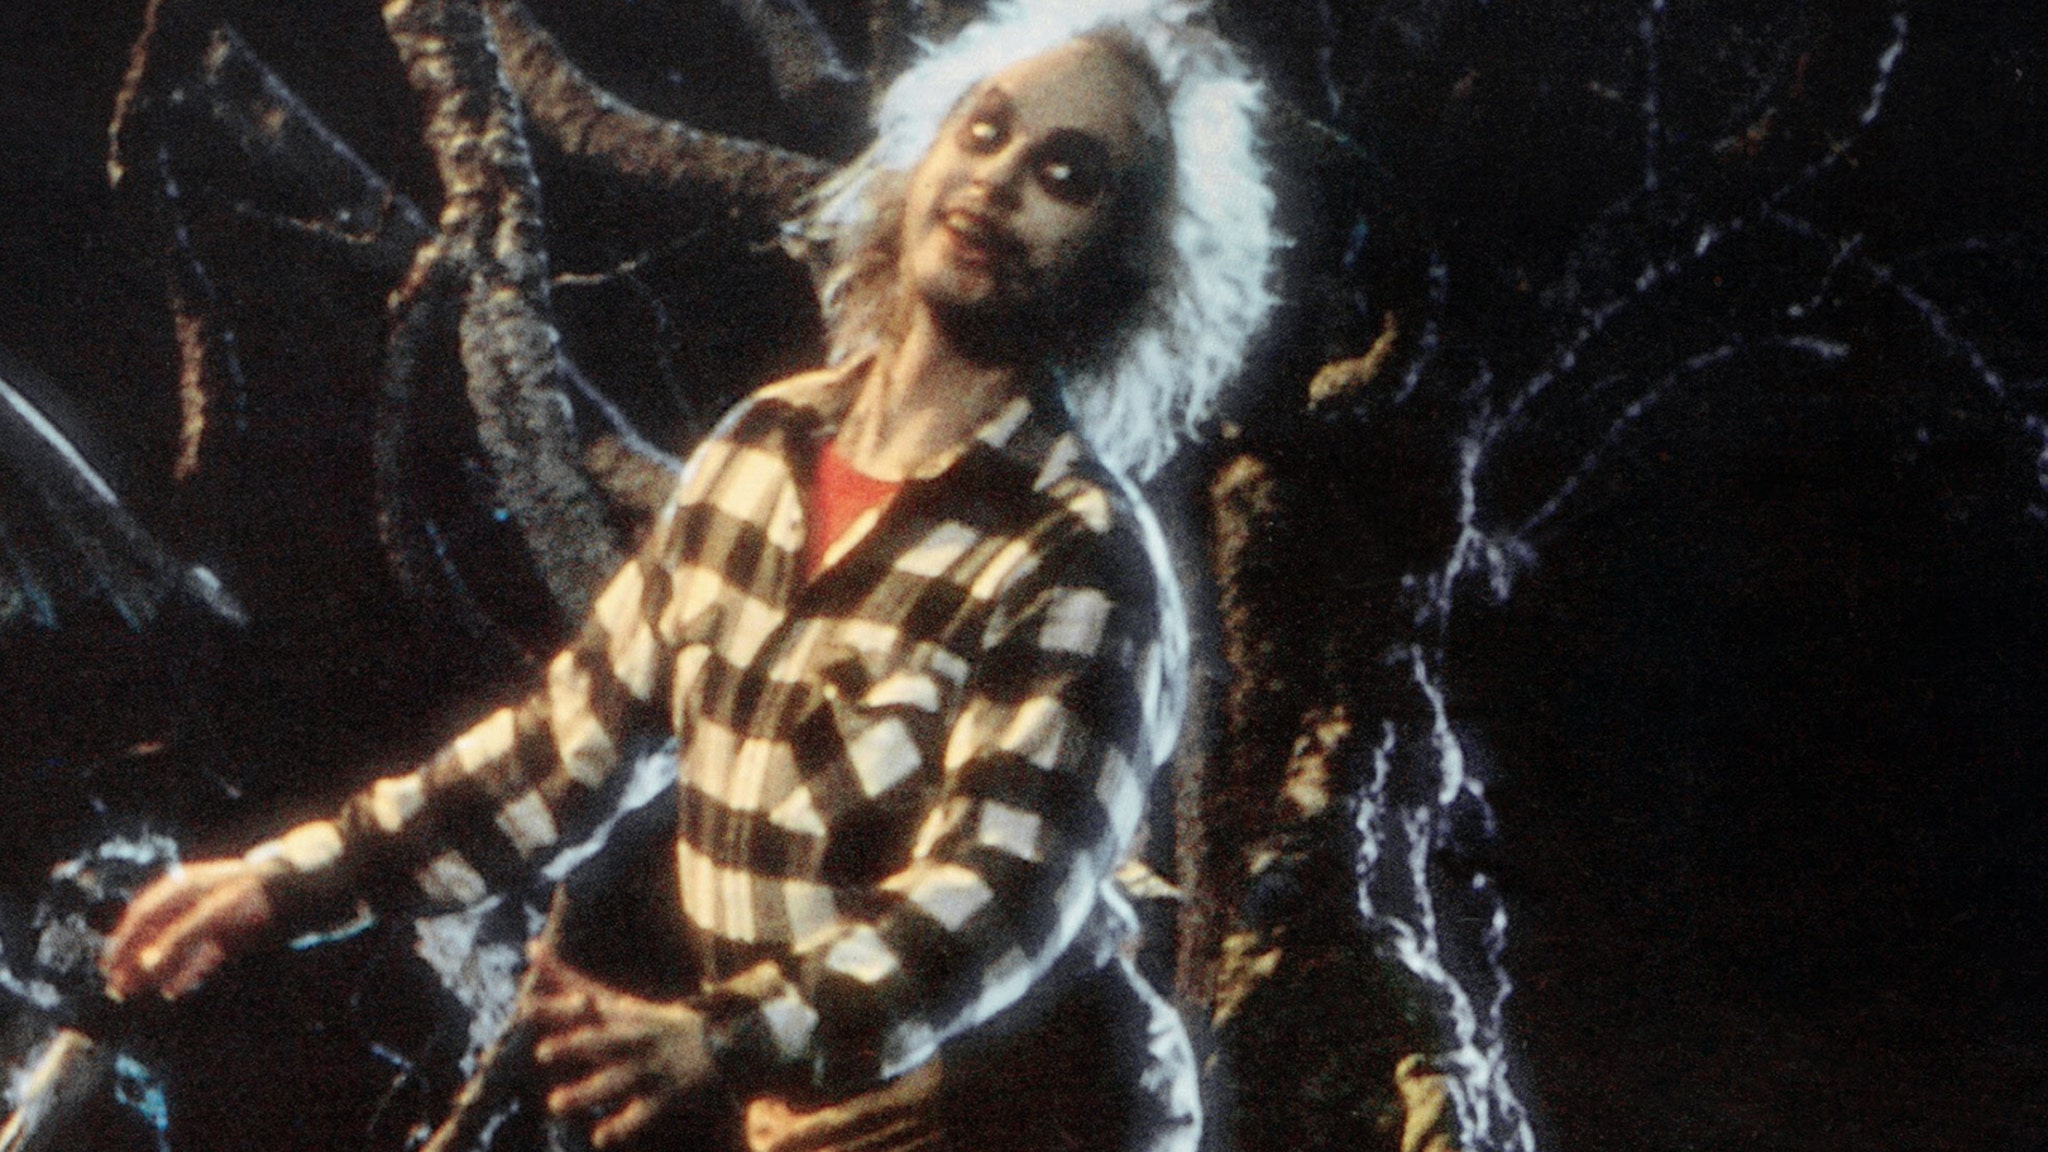 Tim Burton Reveals Beetlejuice Sequel Has Less Than 2 Days of Filming Left Amid Hollywood Strike